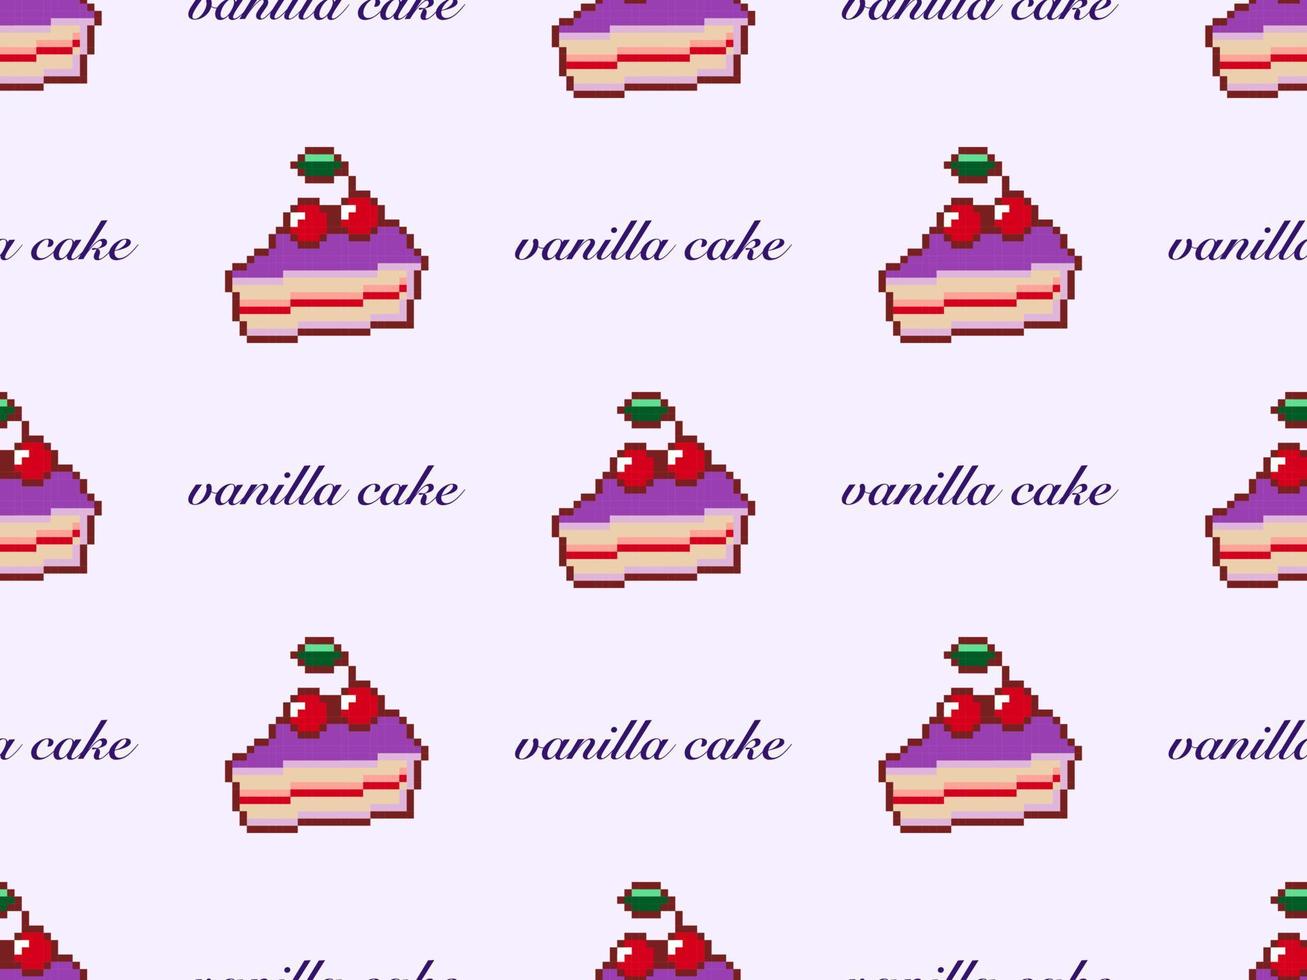 Cake cartoon character seamless pattern on purple background.Pixel style vector